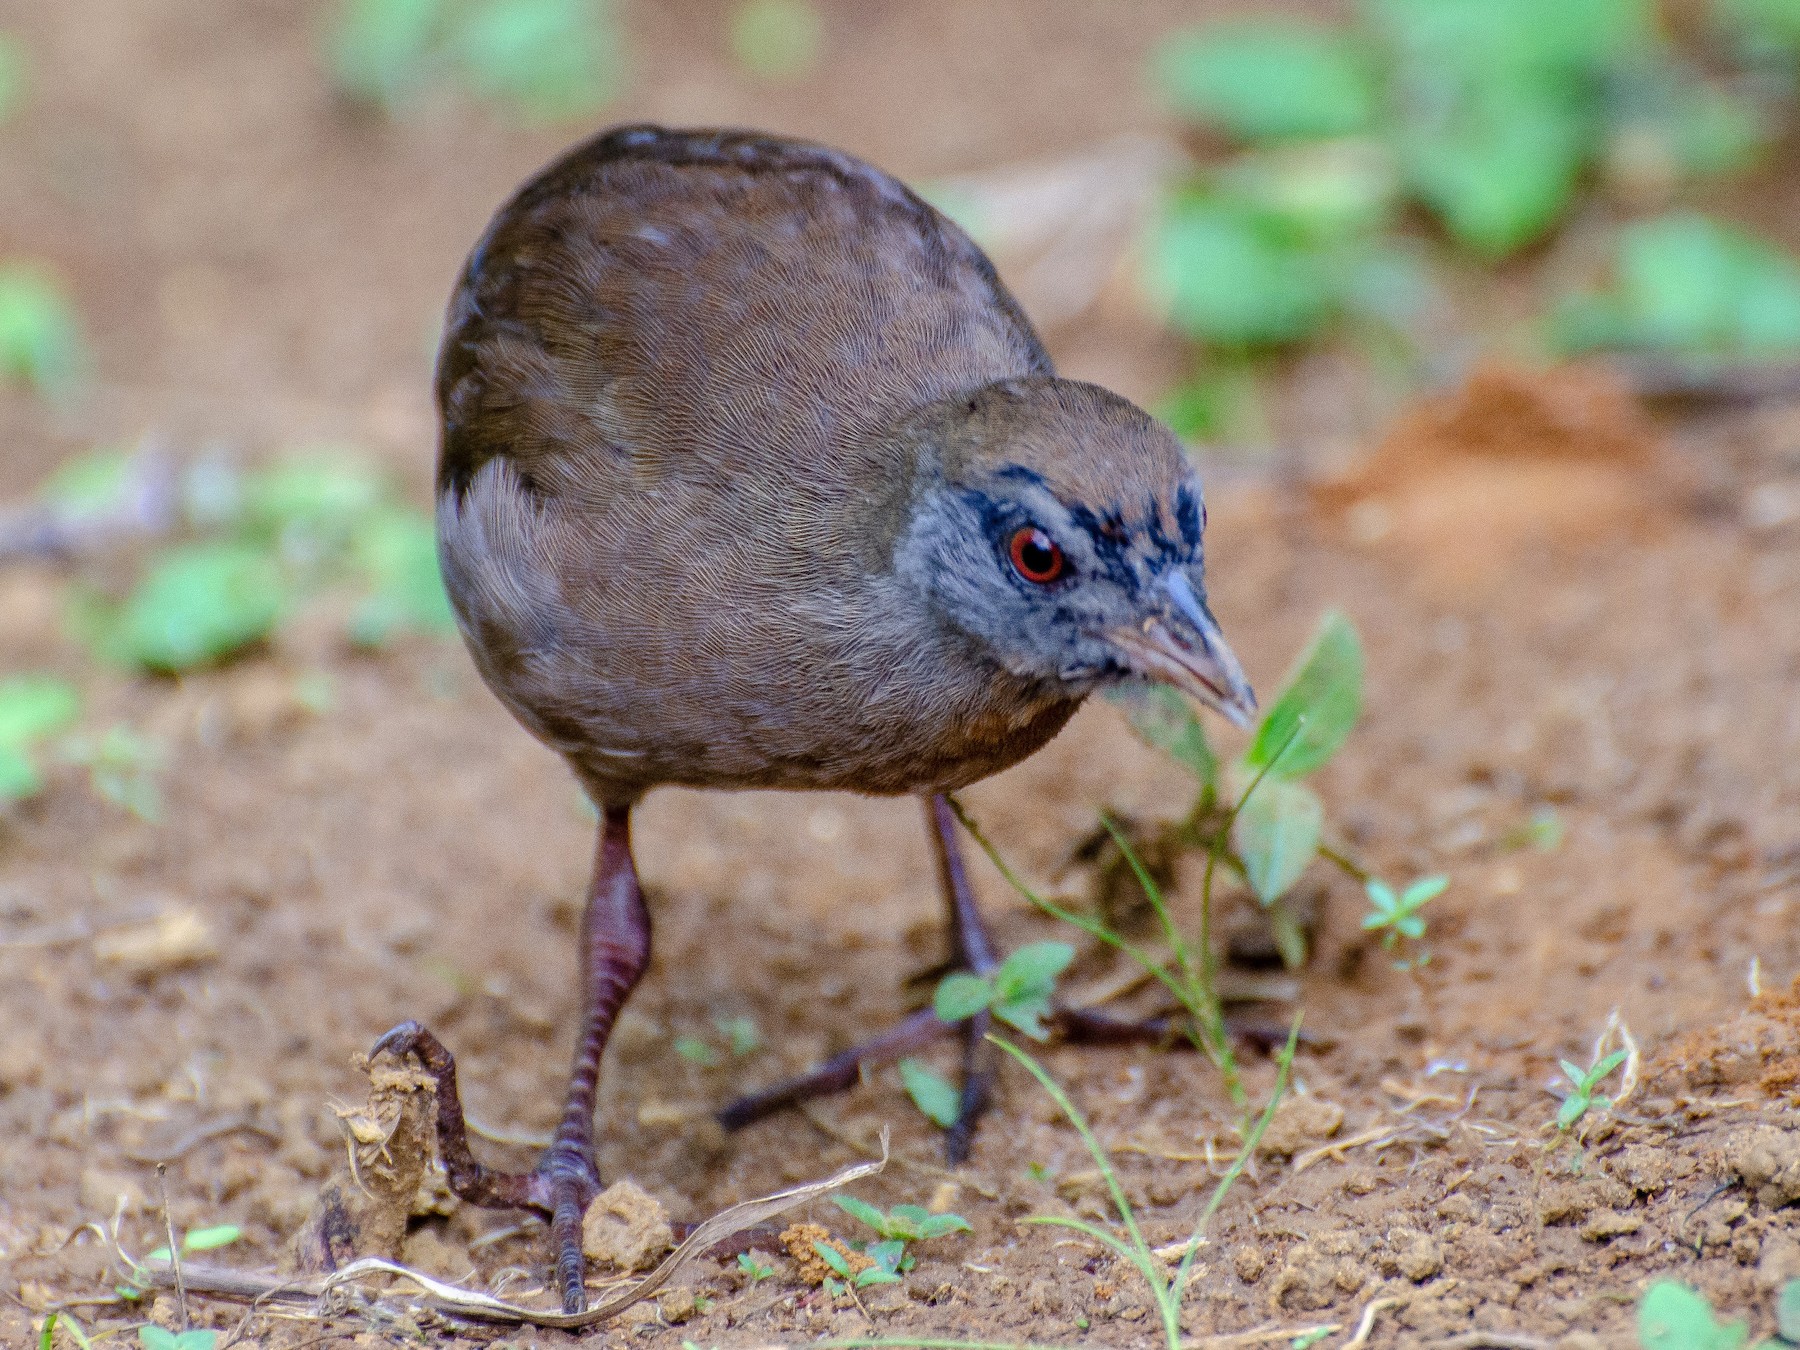 Russet-crowned Crake - Allisson Cafeseiro